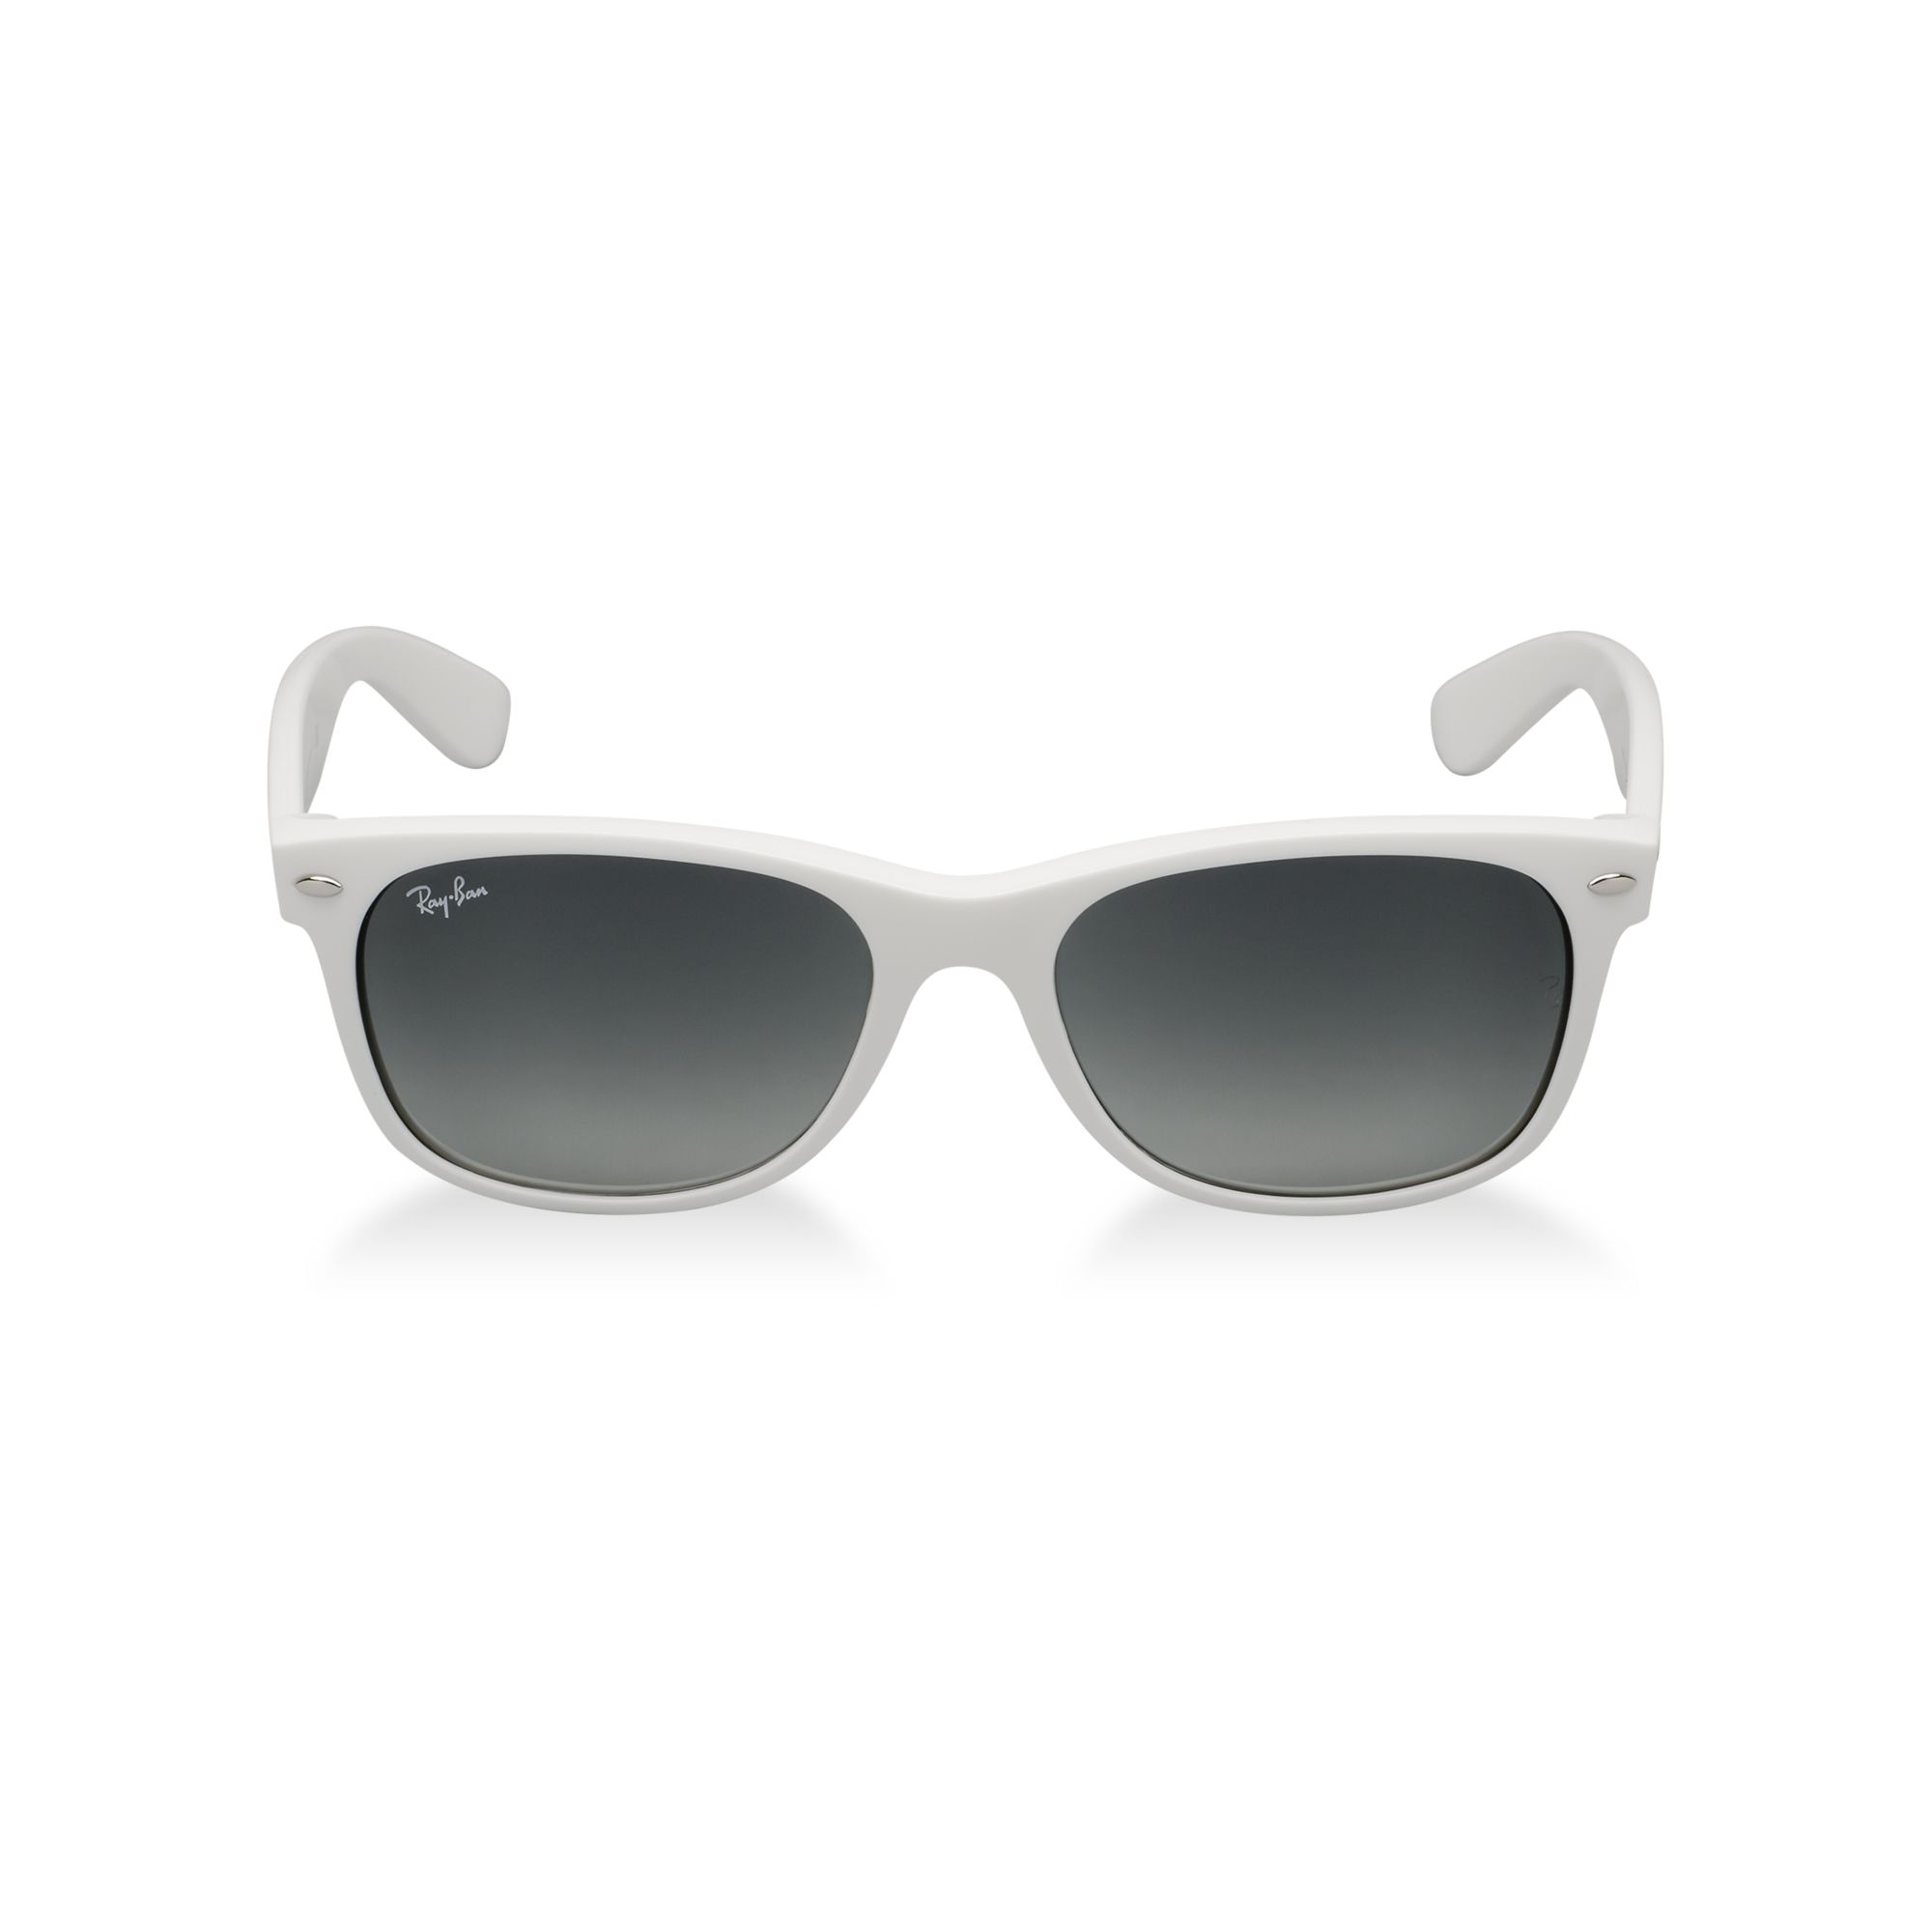 Lyst Ray Ban New Wayfarer Sunglasses with Tapered Temples in White